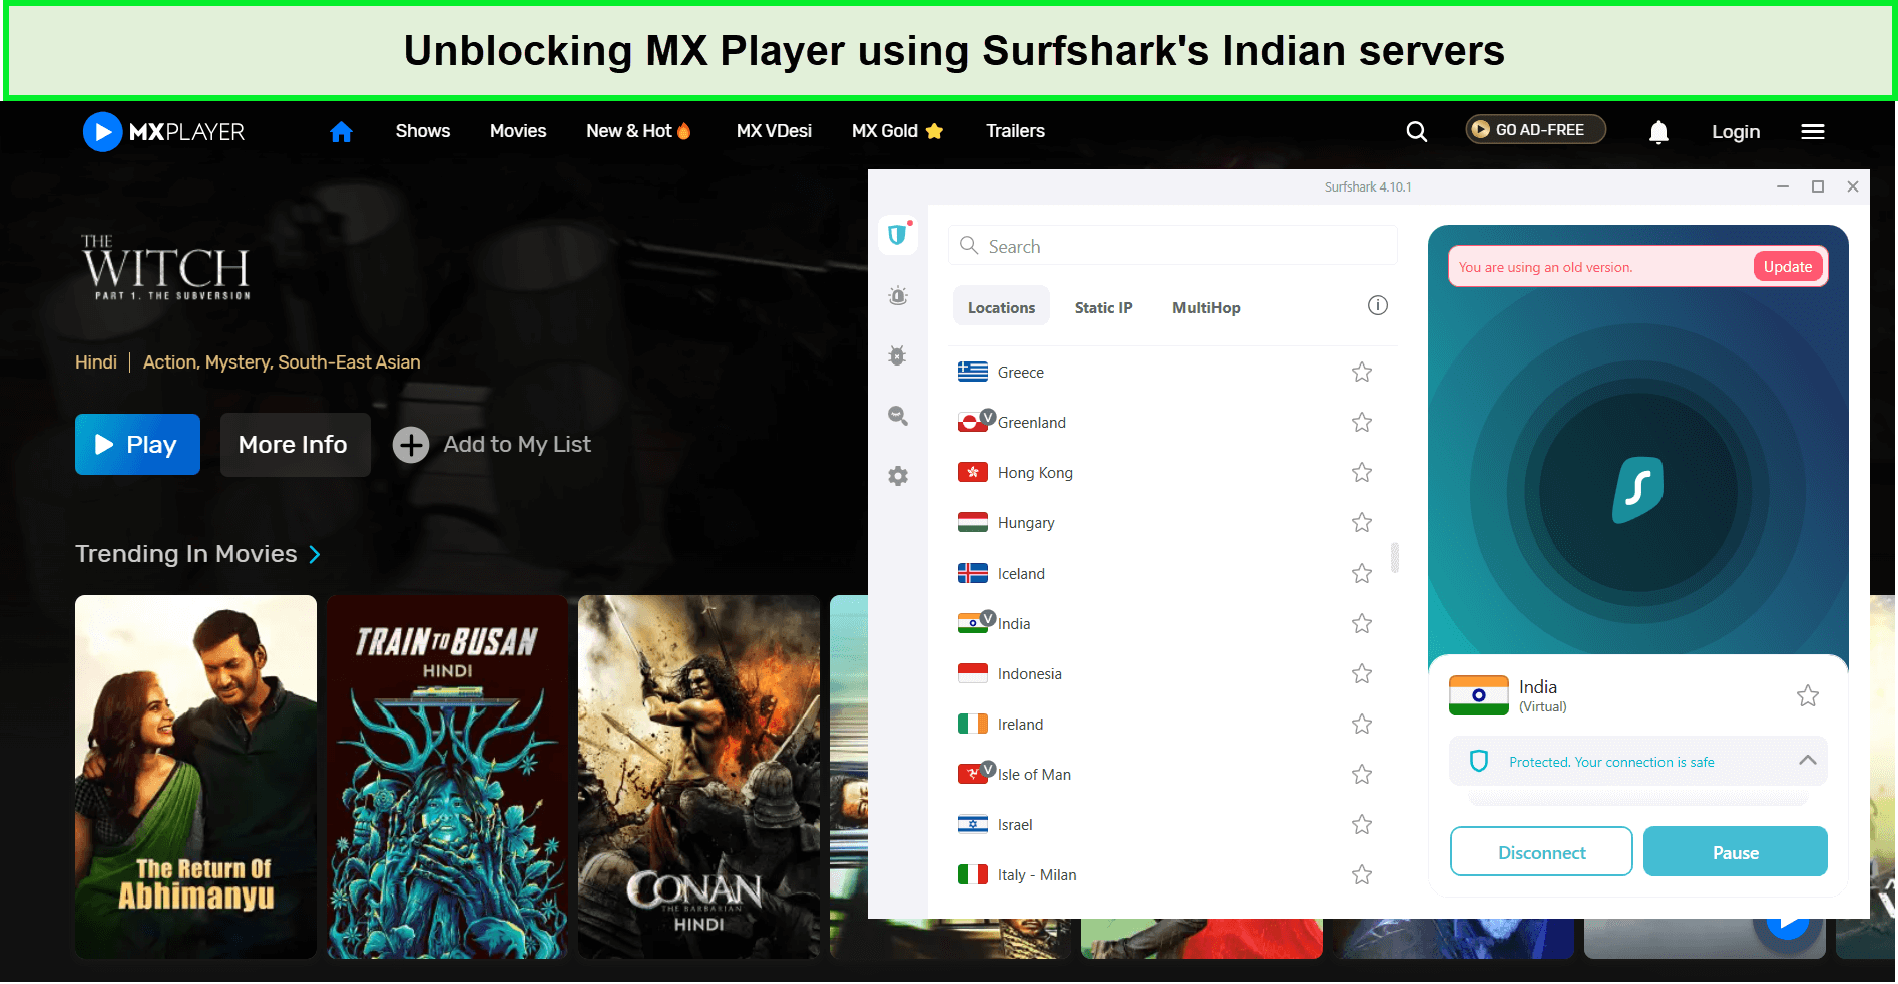 mx-player-in-India-unblocked-surfshark